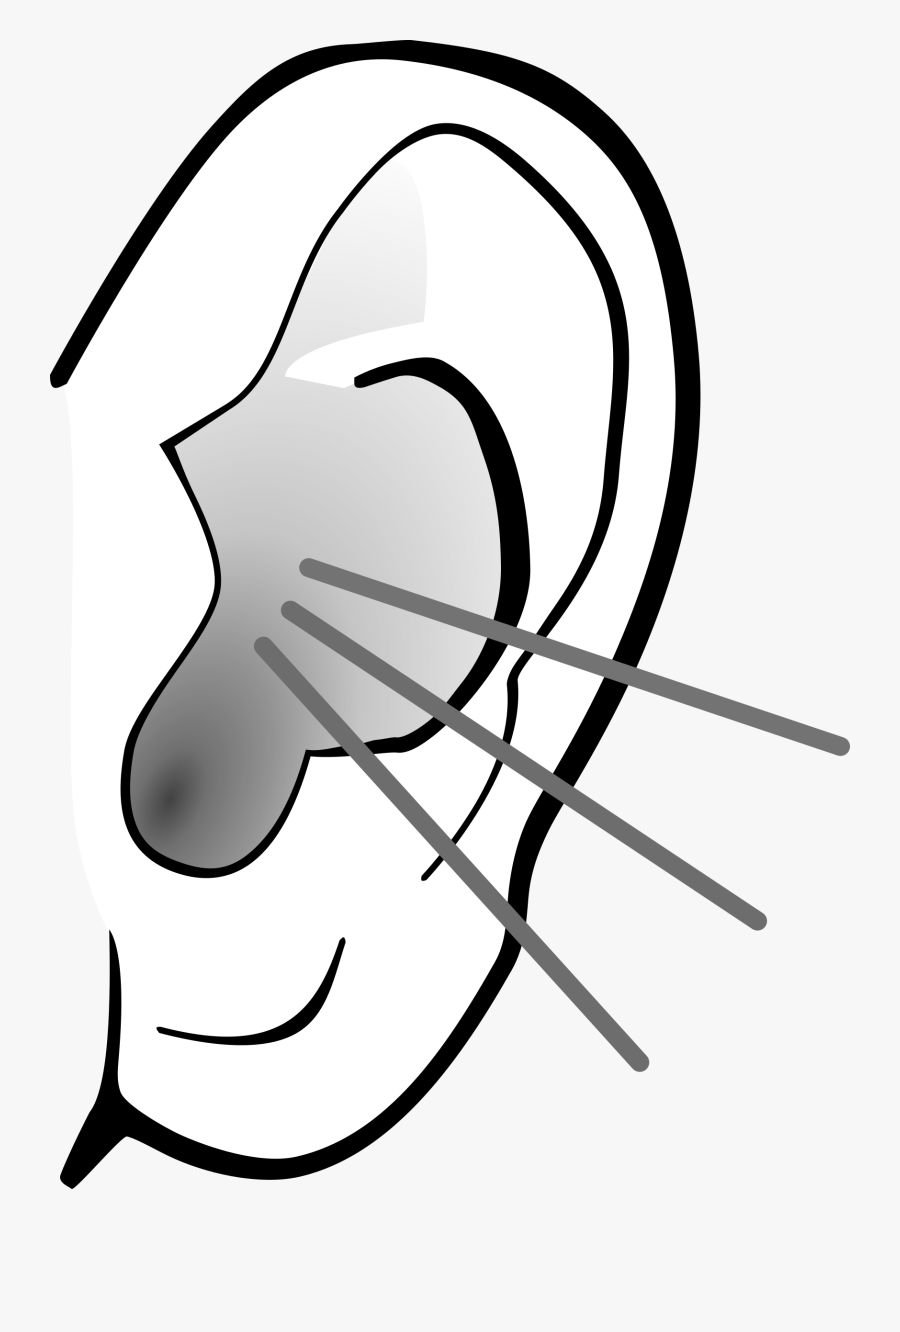 Big Image - Ear Clipart Black And White, Transparent Clipart